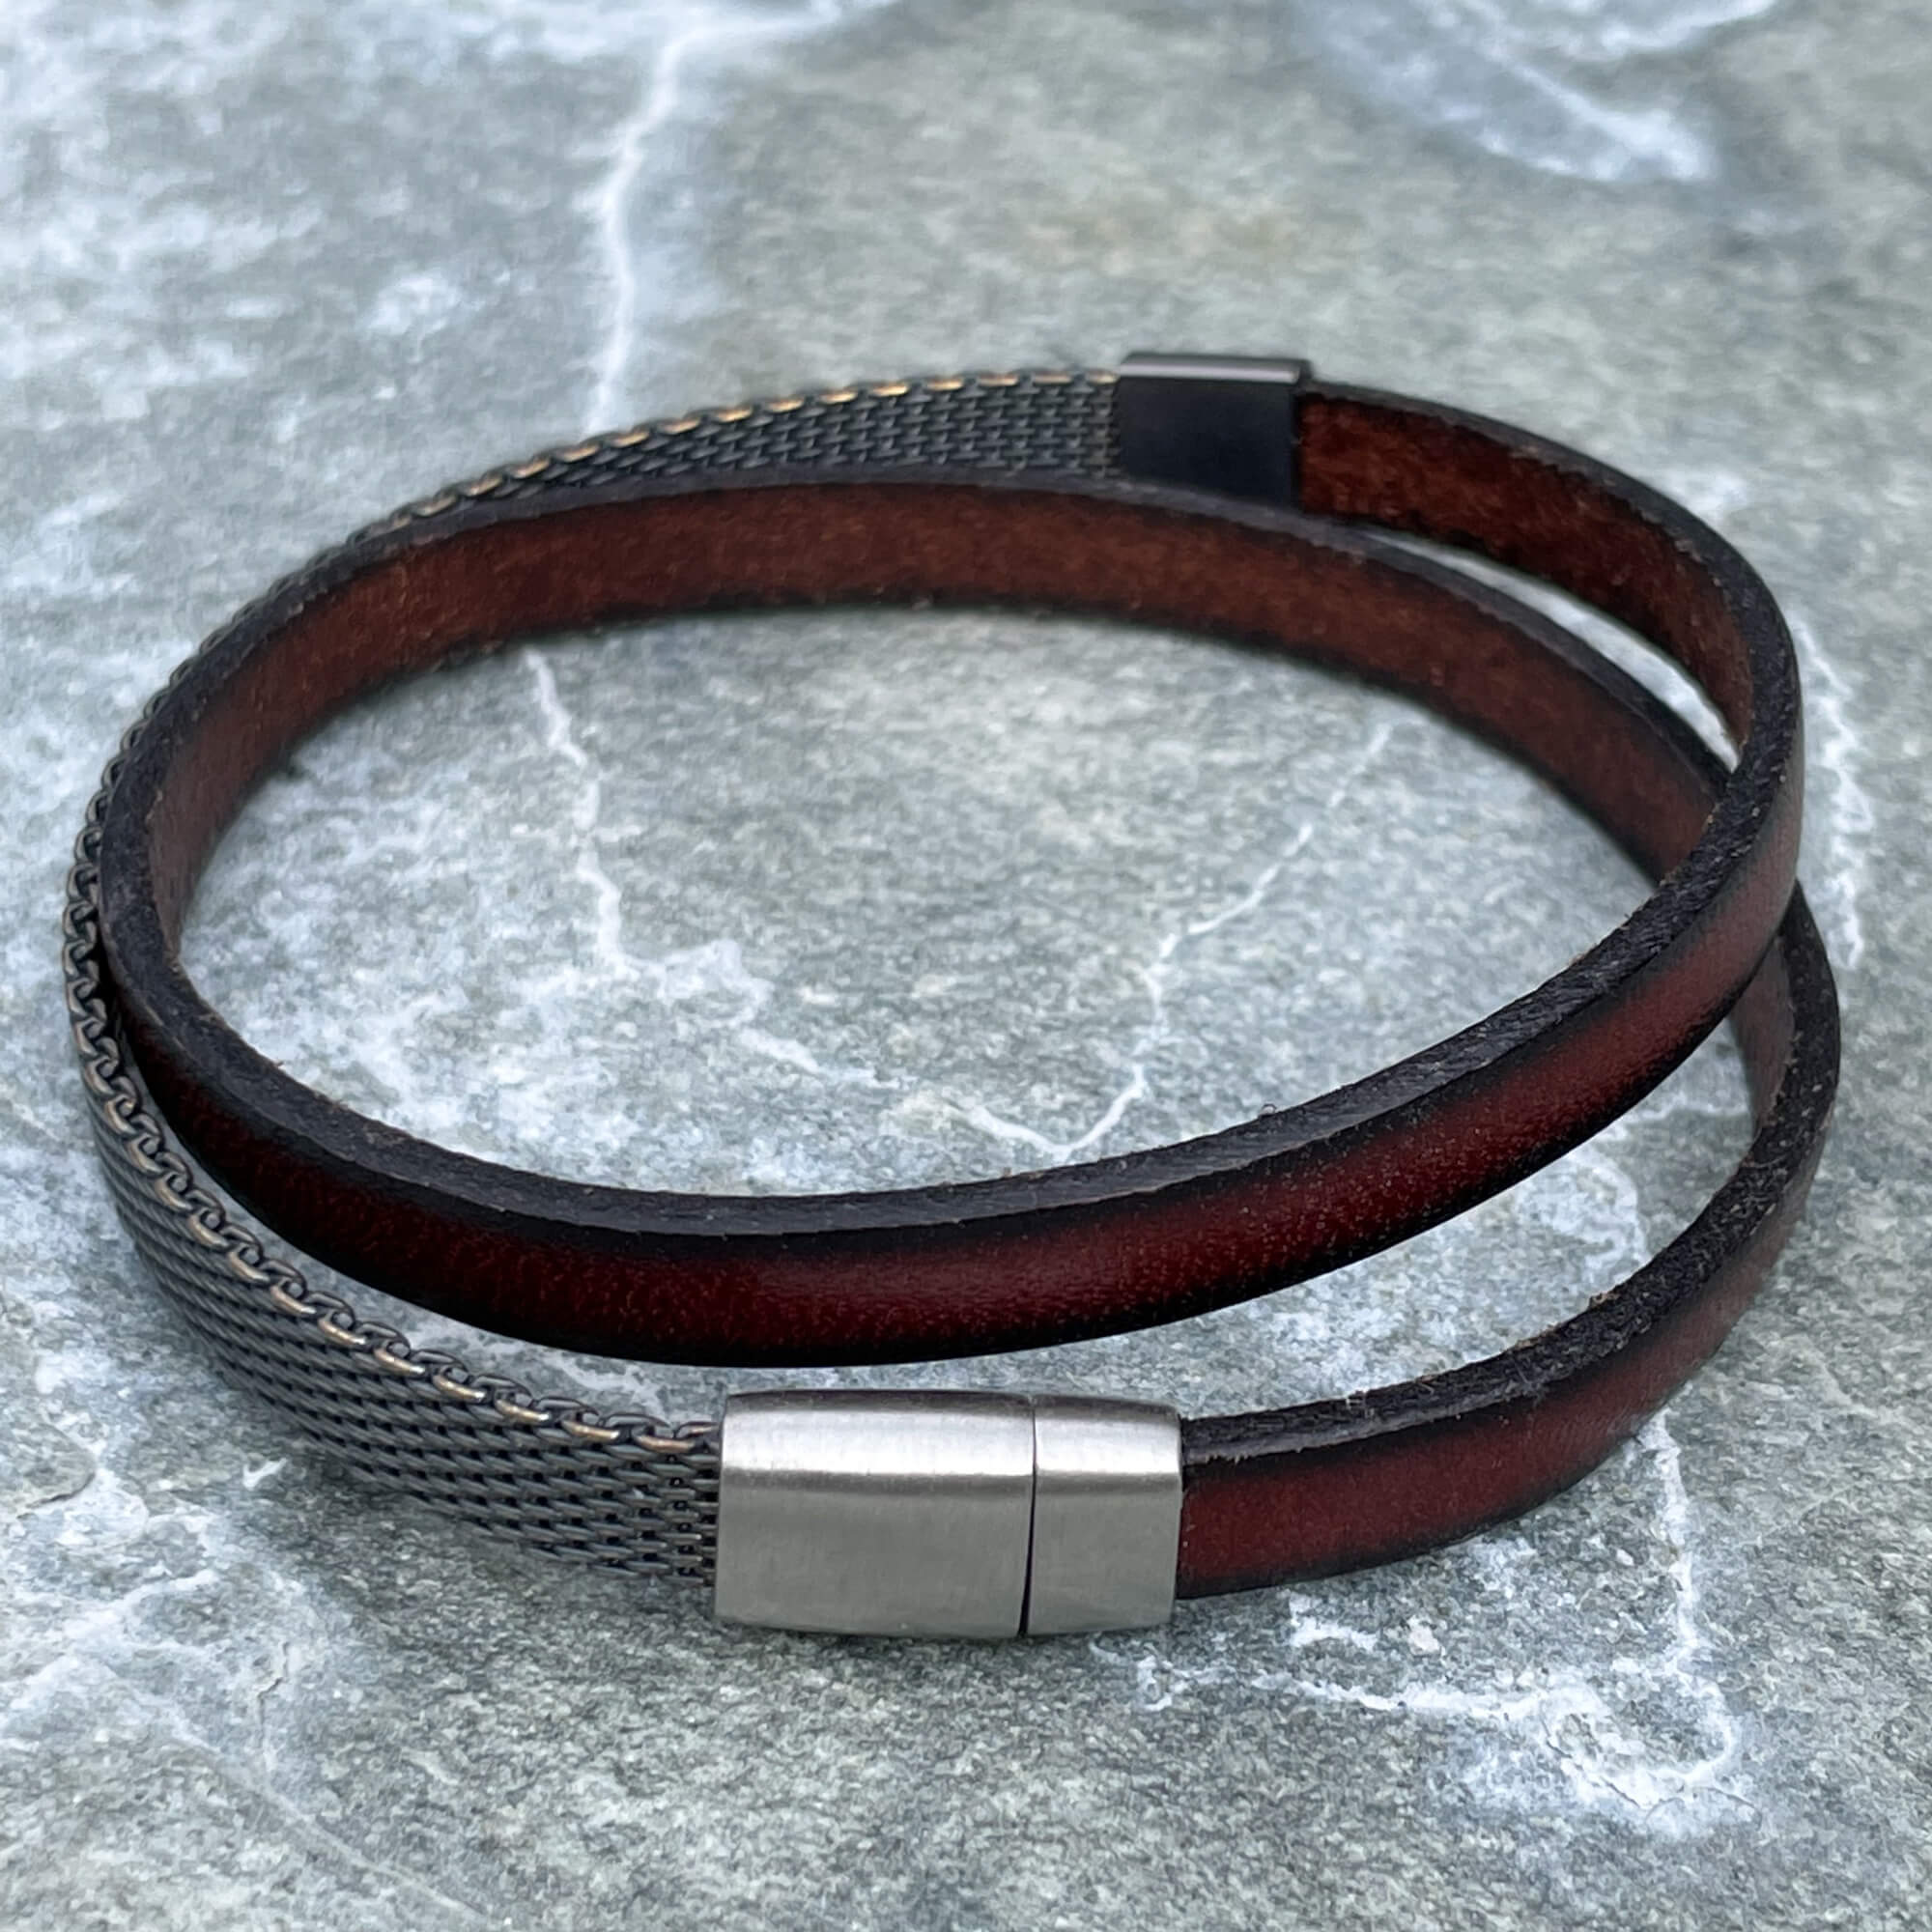 Brown leather double bracelet with braided stainless steel accent